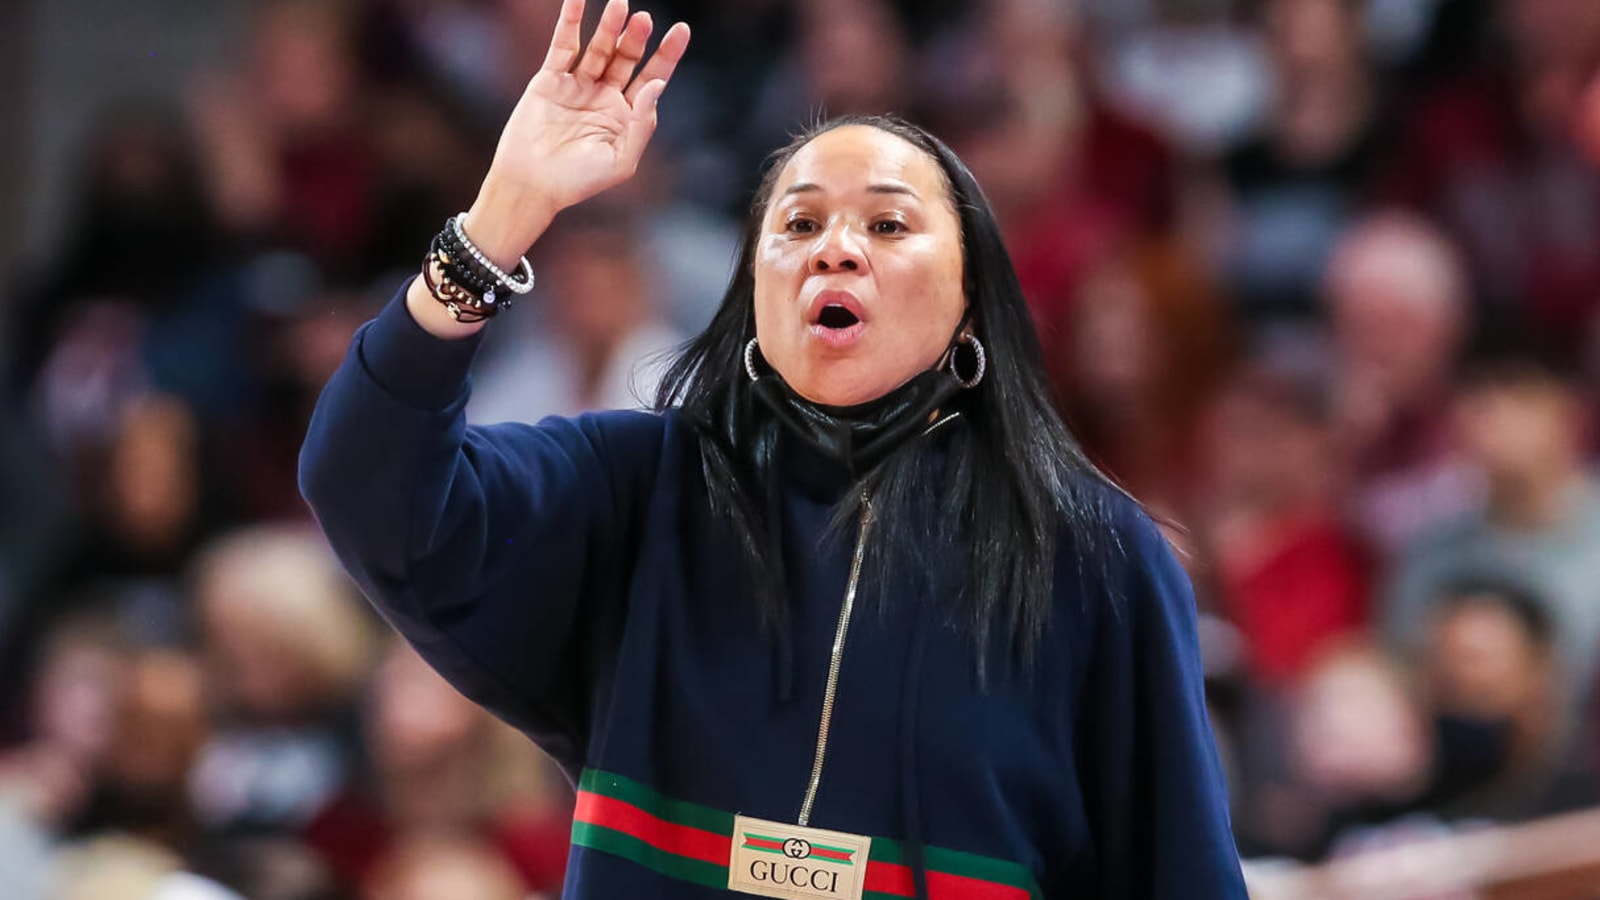 Dawn Staley named Naismith women's coach of the year - Sports Illustrated